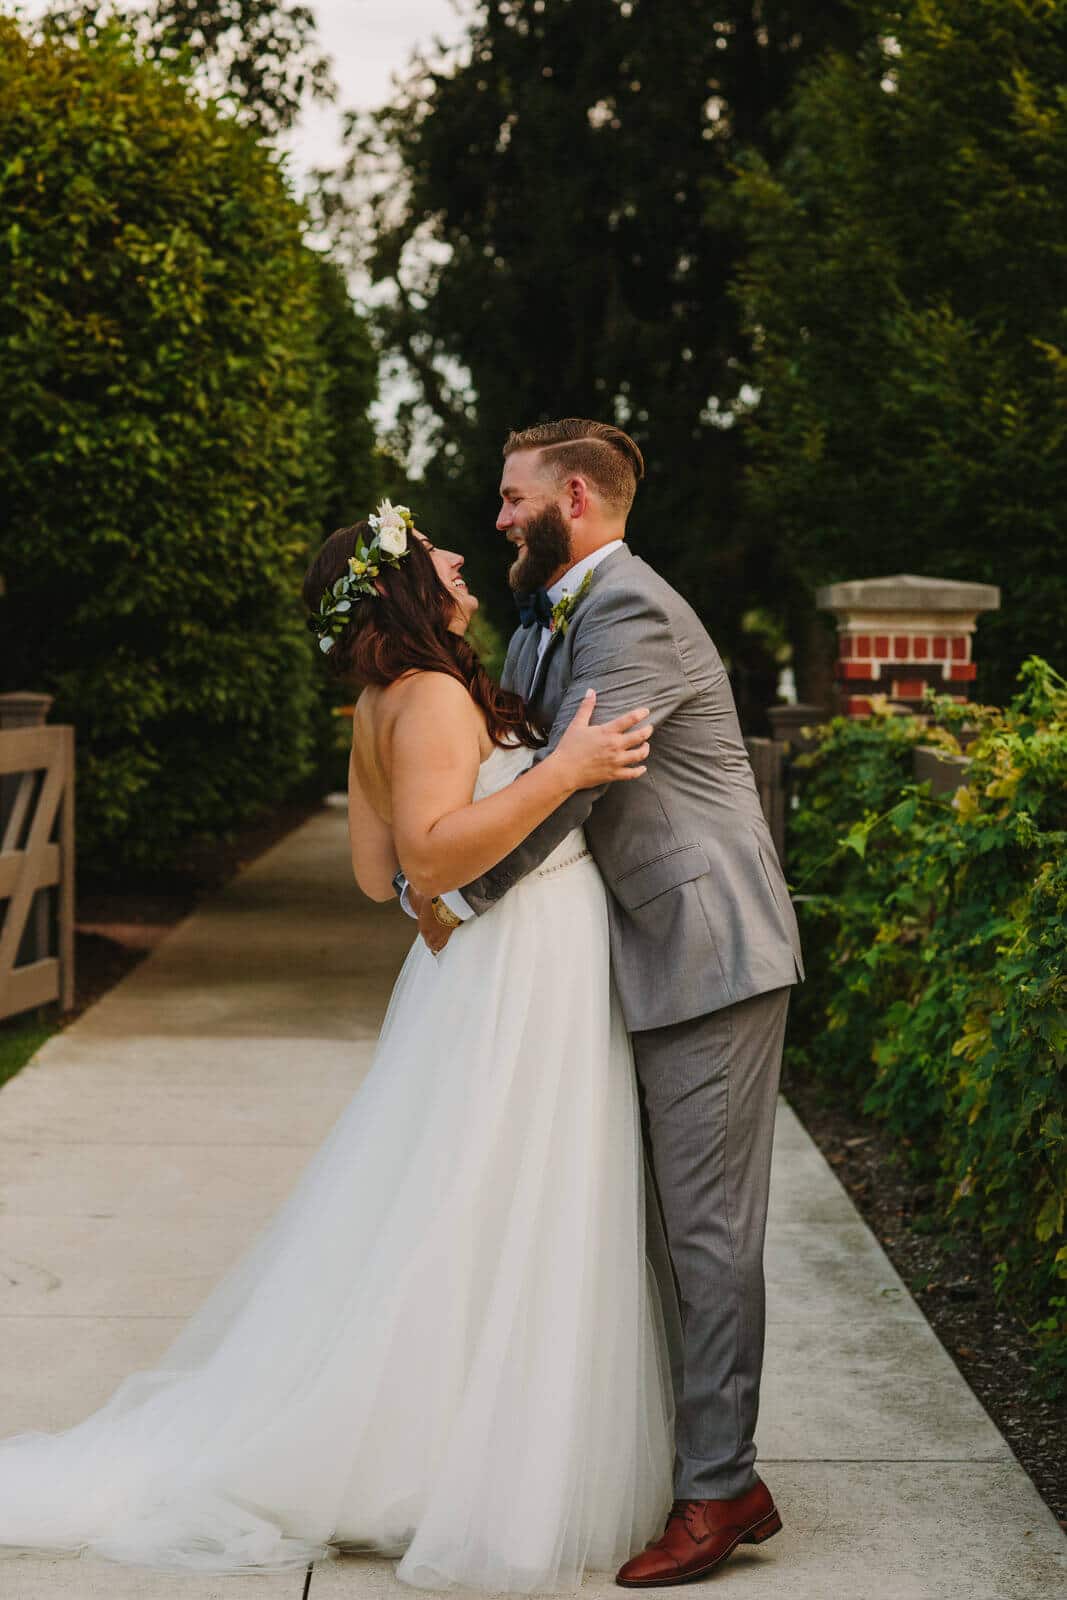 Adam Lowe photography, Columbus, Ohio, wedding, bride and groom, style, cool, editorial, fashion, downtown, outdoor wedding, bride and groom, wedding dress, Franklin park conservatory,